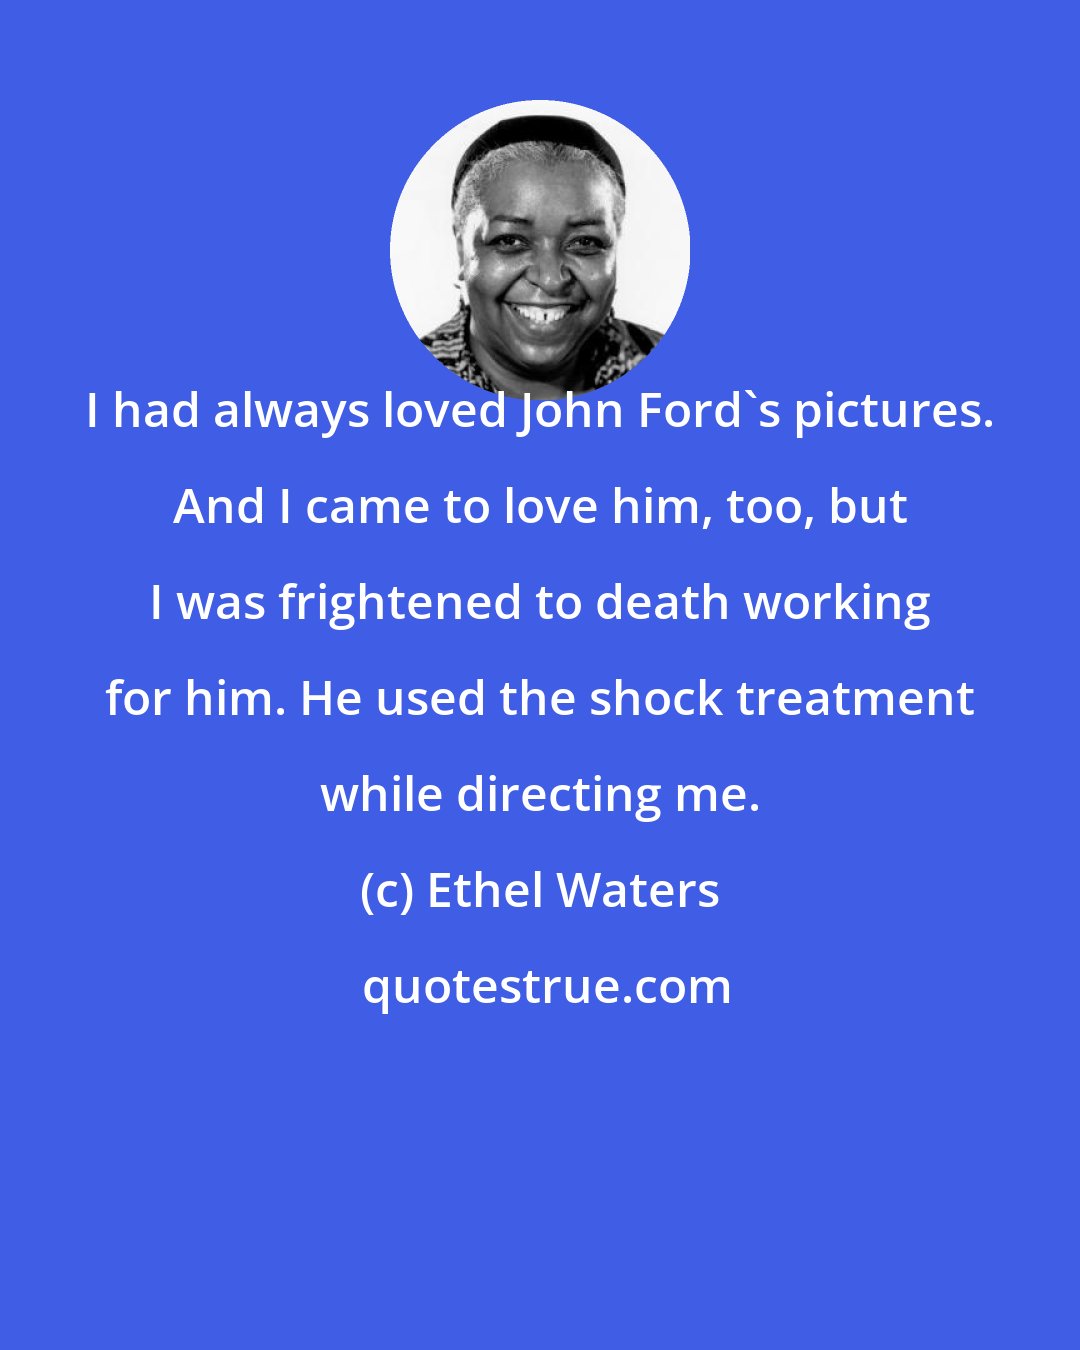 Ethel Waters: I had always loved John Ford's pictures. And I came to love him, too, but I was frightened to death working for him. He used the shock treatment while directing me.